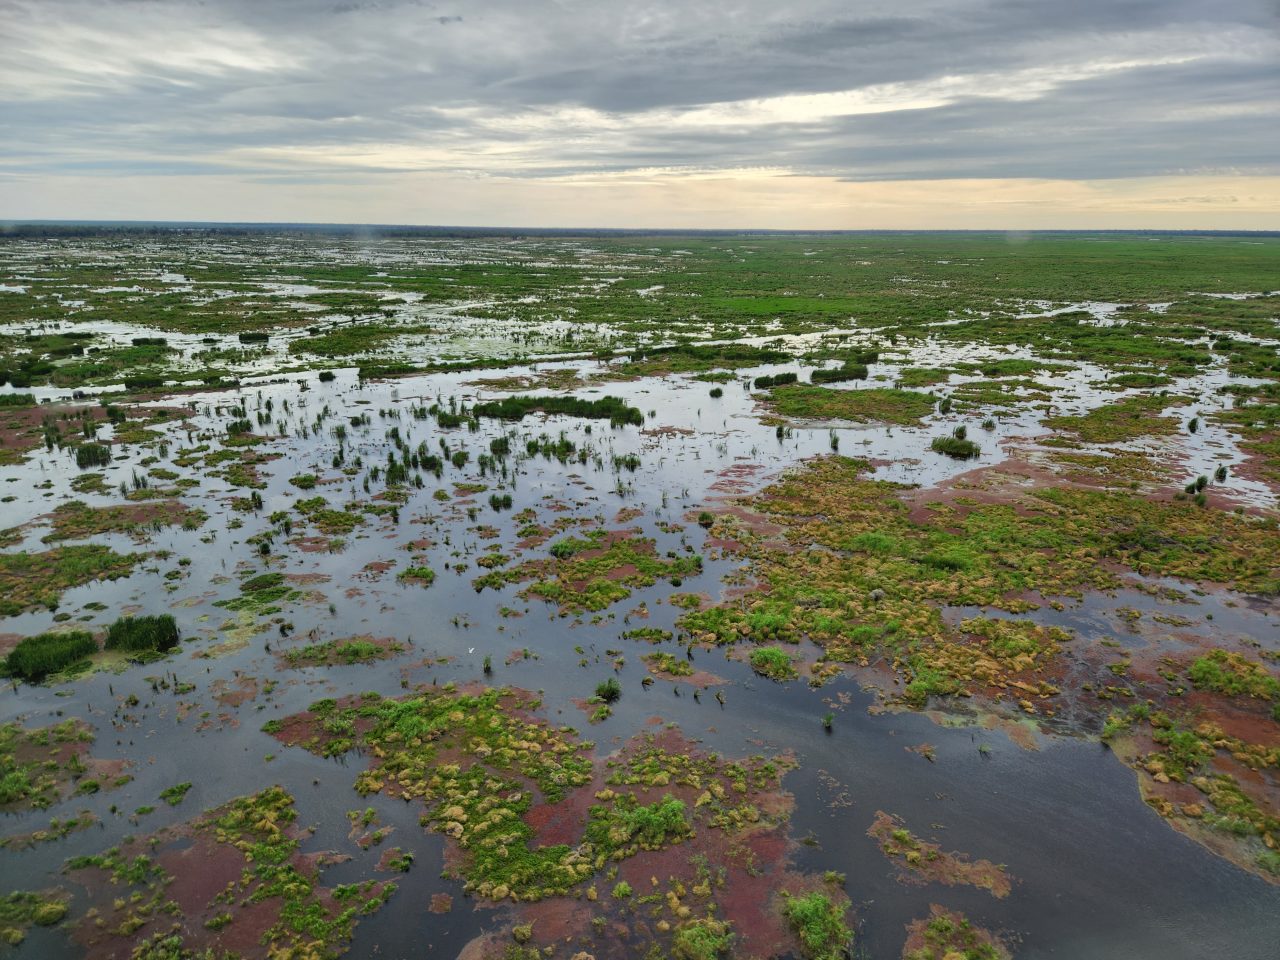 Aerial photo of vast inland wetland with a landscape scale patchwork of low level islands covered in green vegetation inundated by water